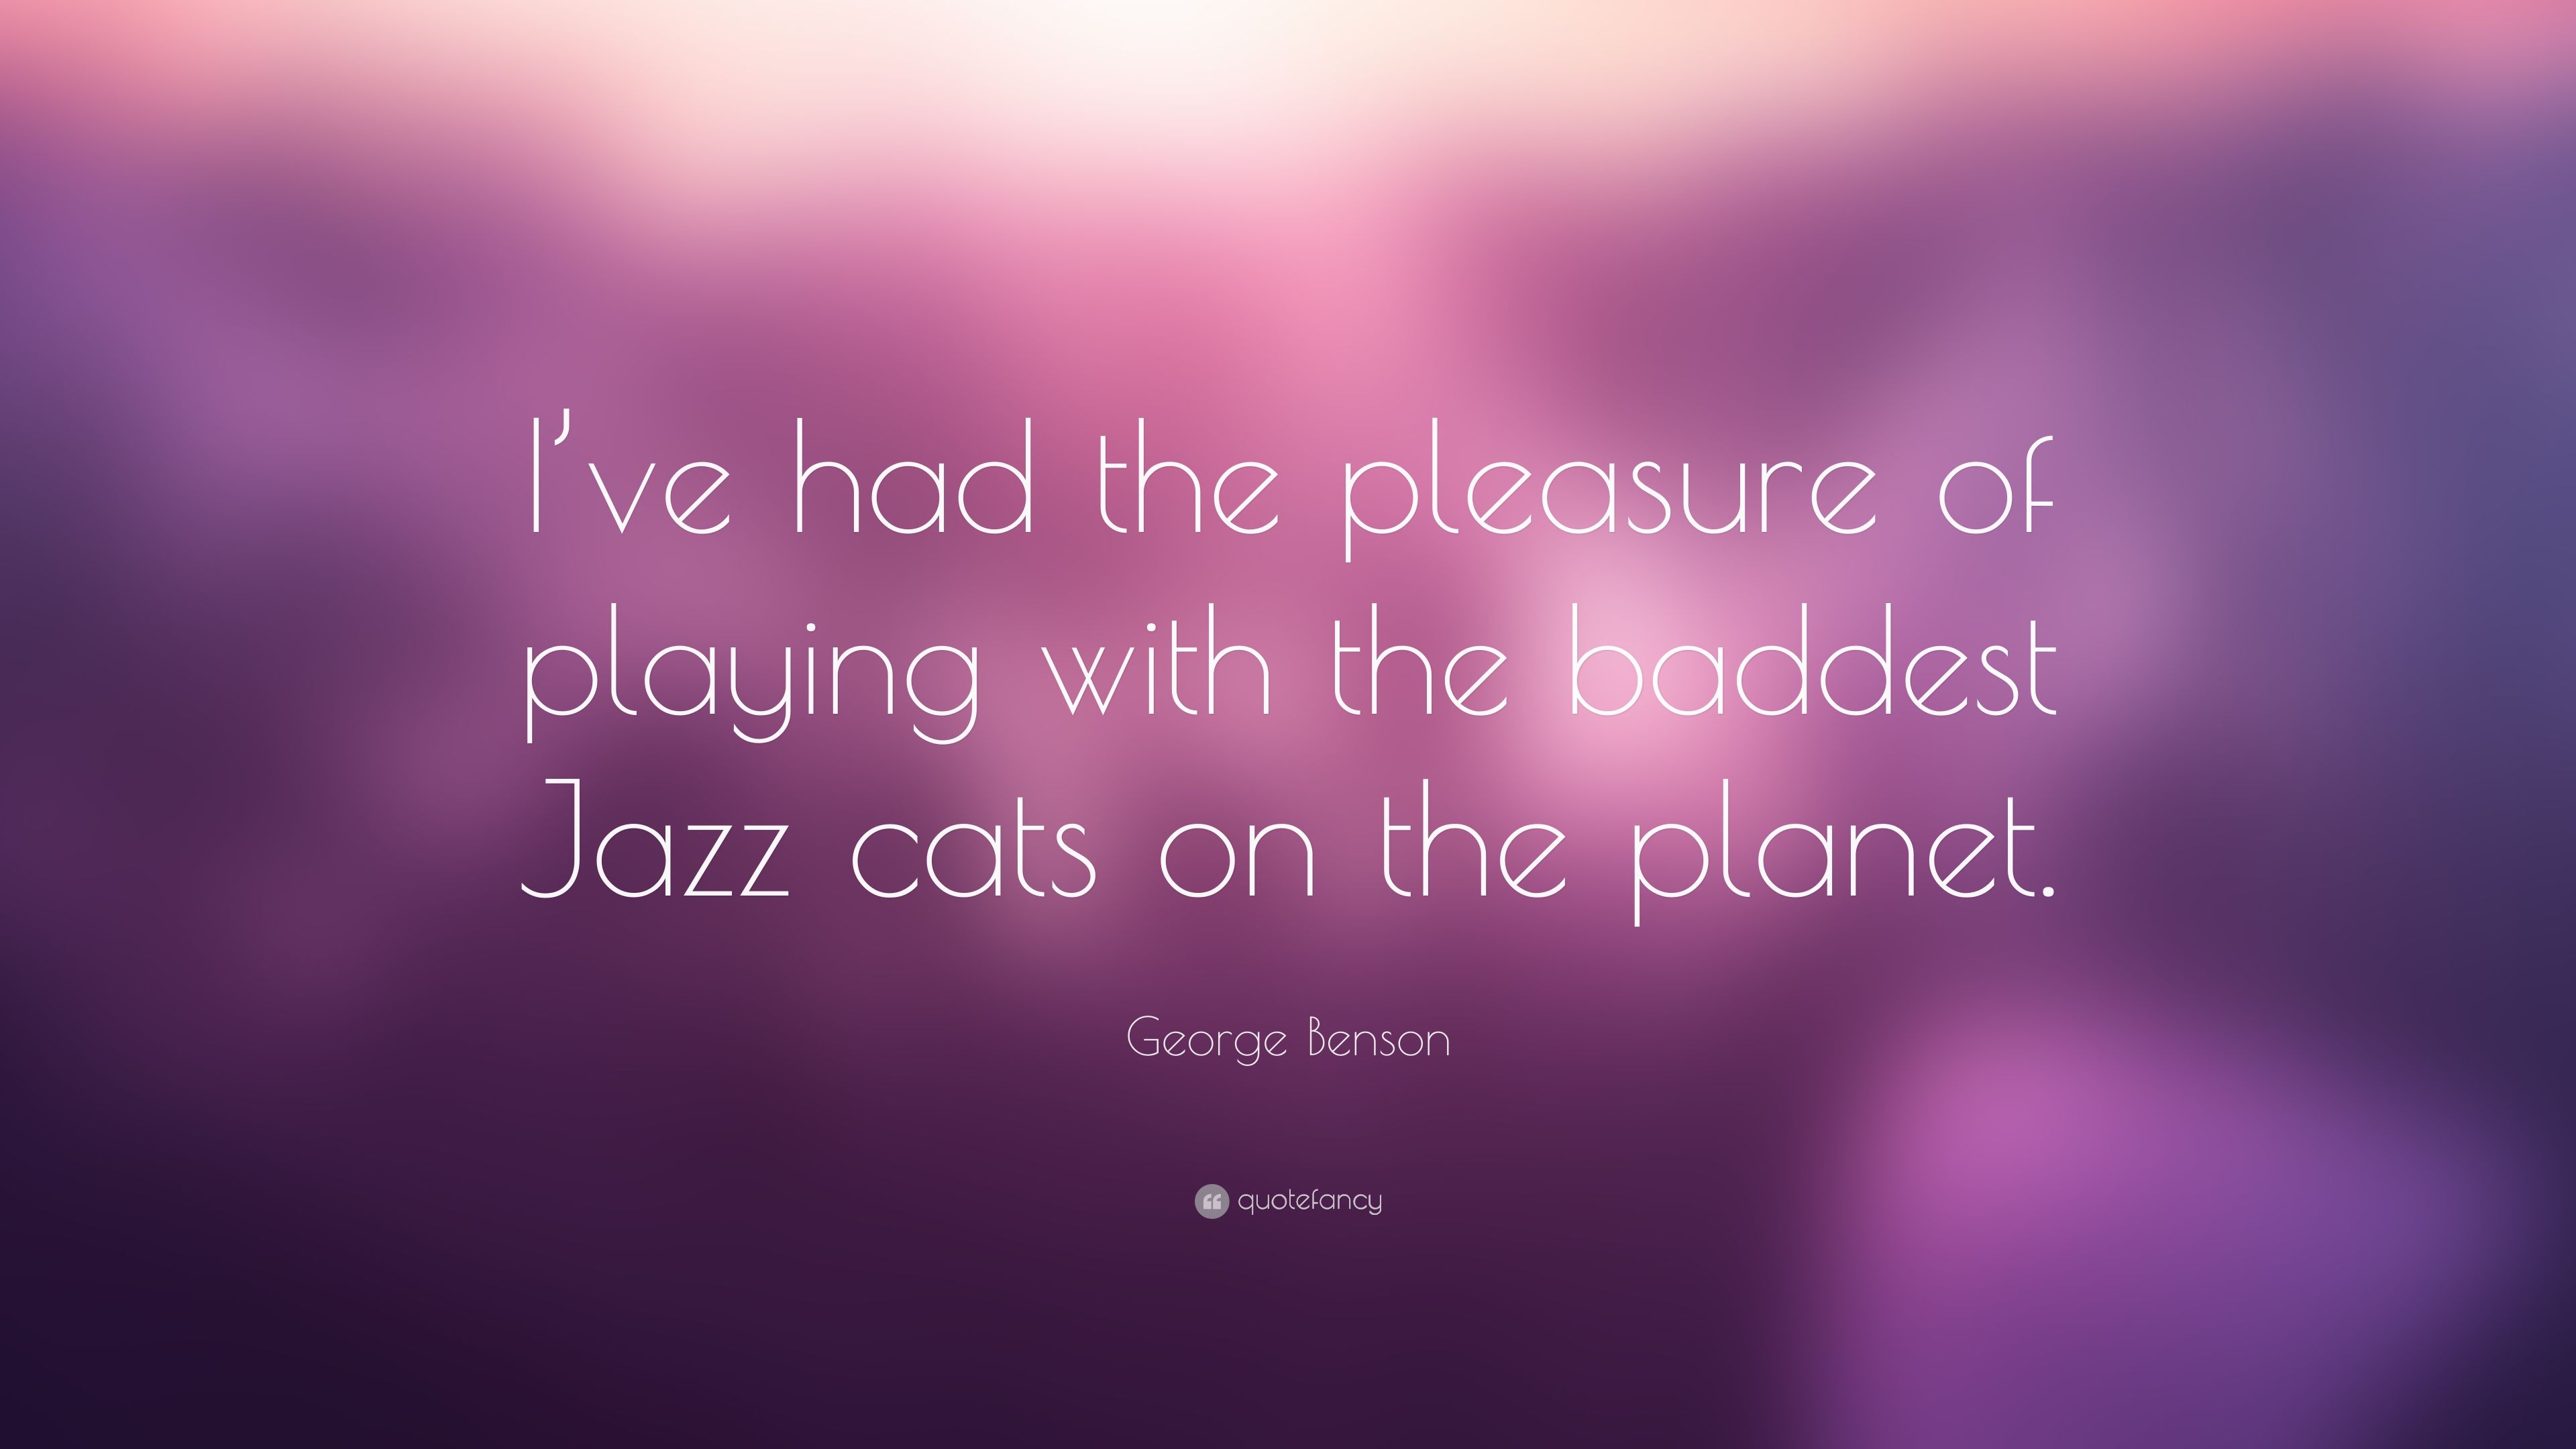 George Benson Quote: “I've had the pleasure of playing with the baddest Jazz cats on the planet.” (7 wallpaper)